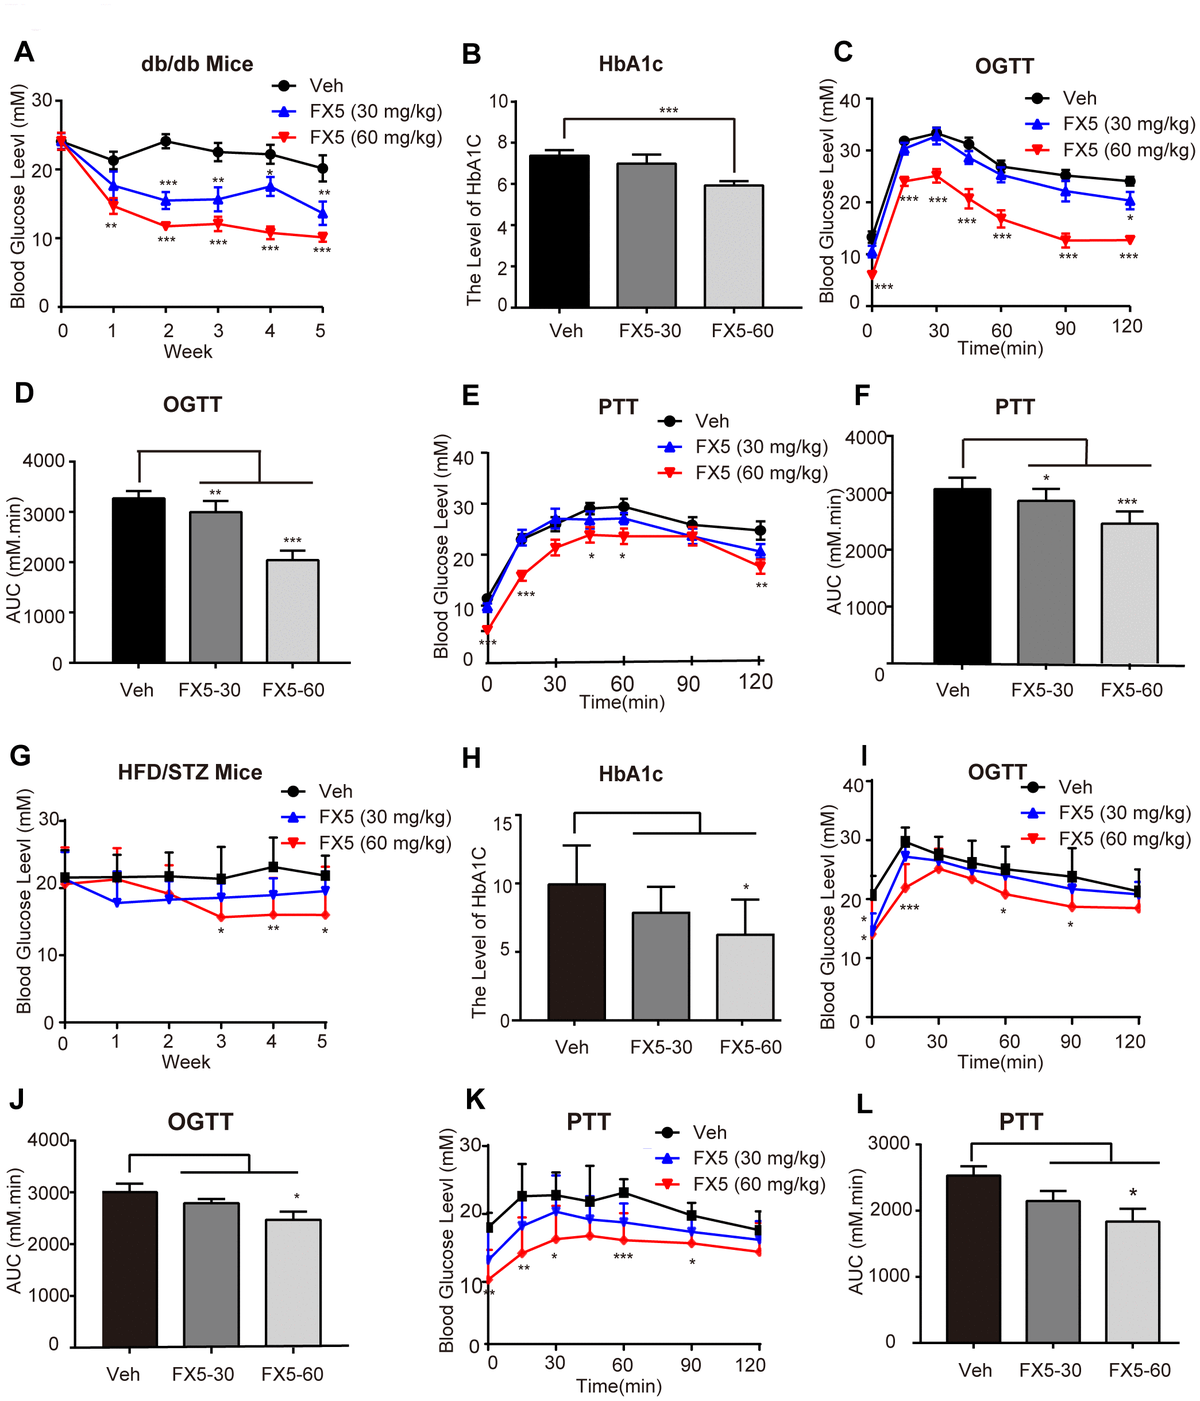 FX5 treatment improved glucose homeostasis in db/db and HFD/STZ-induced T2DM mice. (A) db/db mice were divided into three groups (n=10/group), and treated with vehicle (Veh), FX5 (30 mg/kg) or FX5 (60 mg/kg) once per day for 5 weeks. Plasma glucose concentration after 6 h fasting was measured weekly. (B) After 5-week administration, HbA1c level of db/db mice in three groups was detected. (C) OGTT result and (D) AUC result of OGTT in db/db mice. (E) PTT result and (F) AUC result of PTT in db/db mice. (G) HFD/STZ-induced T2DM mice were divided into three groups (n≥7/group) and treated with vehicle (Veh), FX5 (30 mg/kg) or FX5 (60 mg/kg) for 5 weeks. Plasma glucose concentration after 6 h fasting was measured weekly. (H) After 5-week administration, HbA1c level of HFD/STZ mice in three groups was detected. (I) OGTT result and (J) AUC result of OGTT in HFD/STZ-induced T2DM mice. (K) PTT result and (L) AUC result of PTT in HFD/STZ-induced T2DM mice. In all line graphs, black for vehicle (Veh), blue for FX5 (30 mg/kg) and red for FX5 (60 mg/kg). Values were shown as mean± S.E.M (*PPP